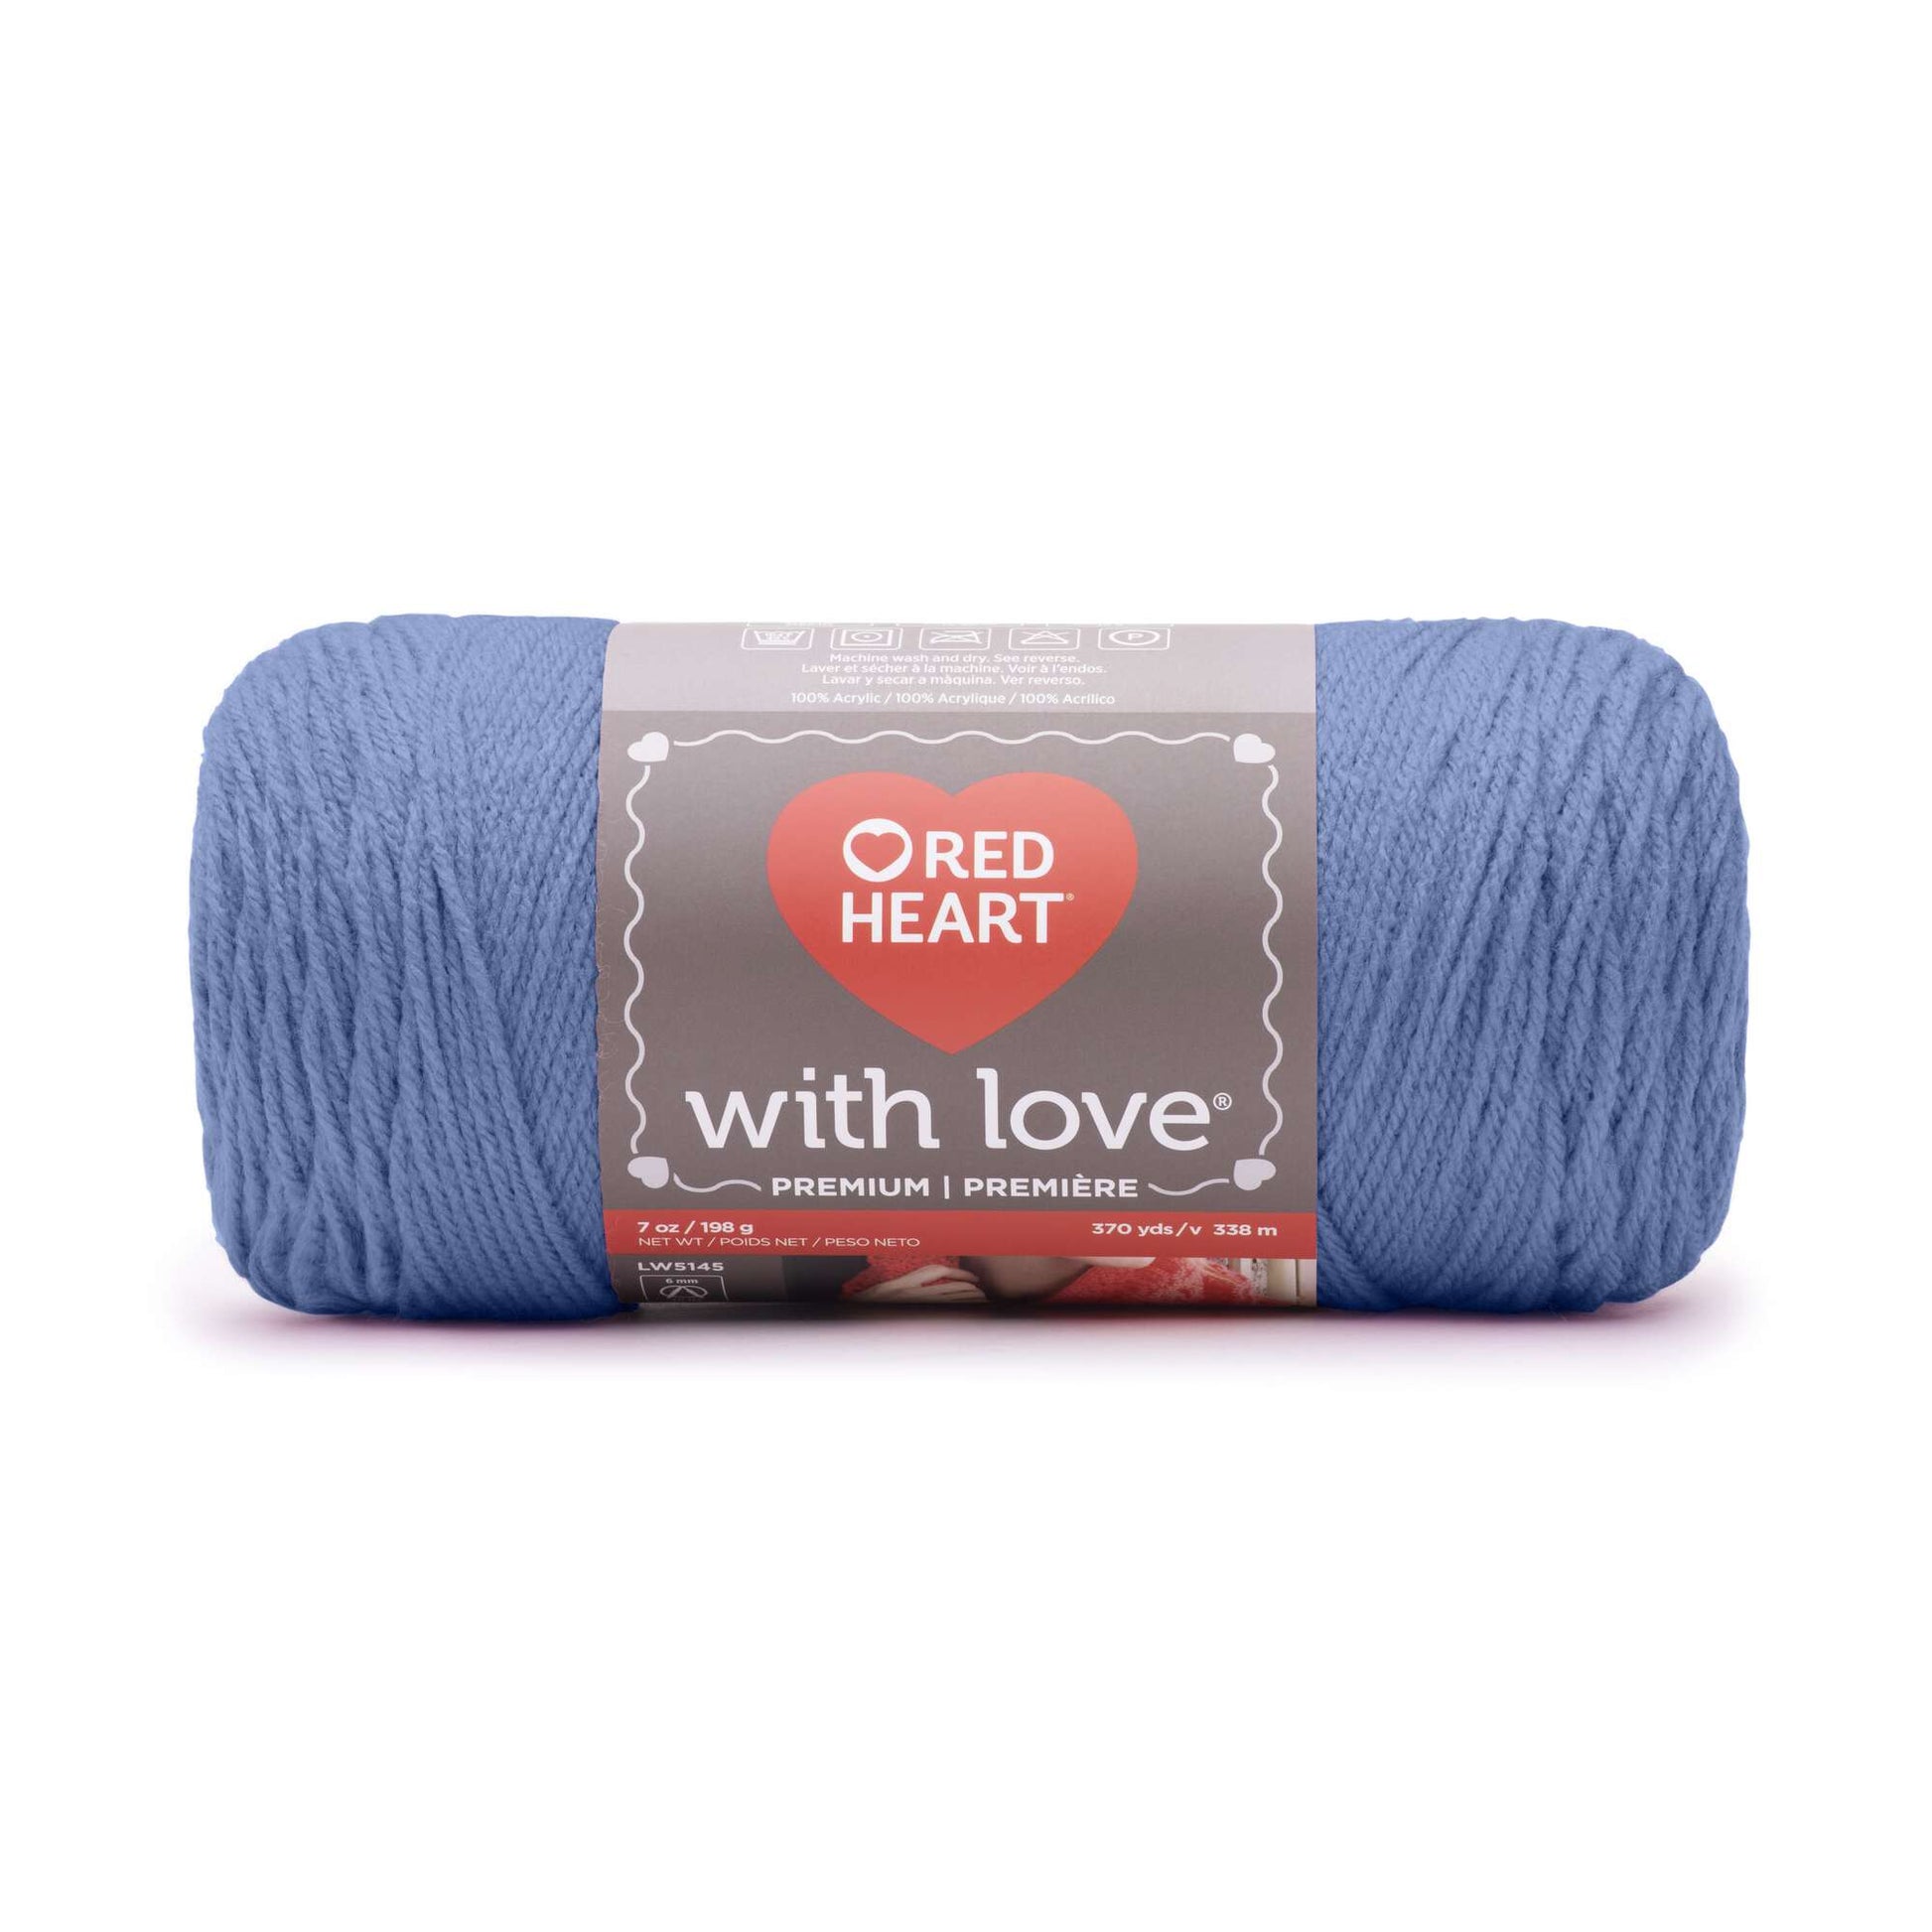 3 Pack Red Heart With Love Yarn-Blue Hawaii E400-1803 - GettyCrafts